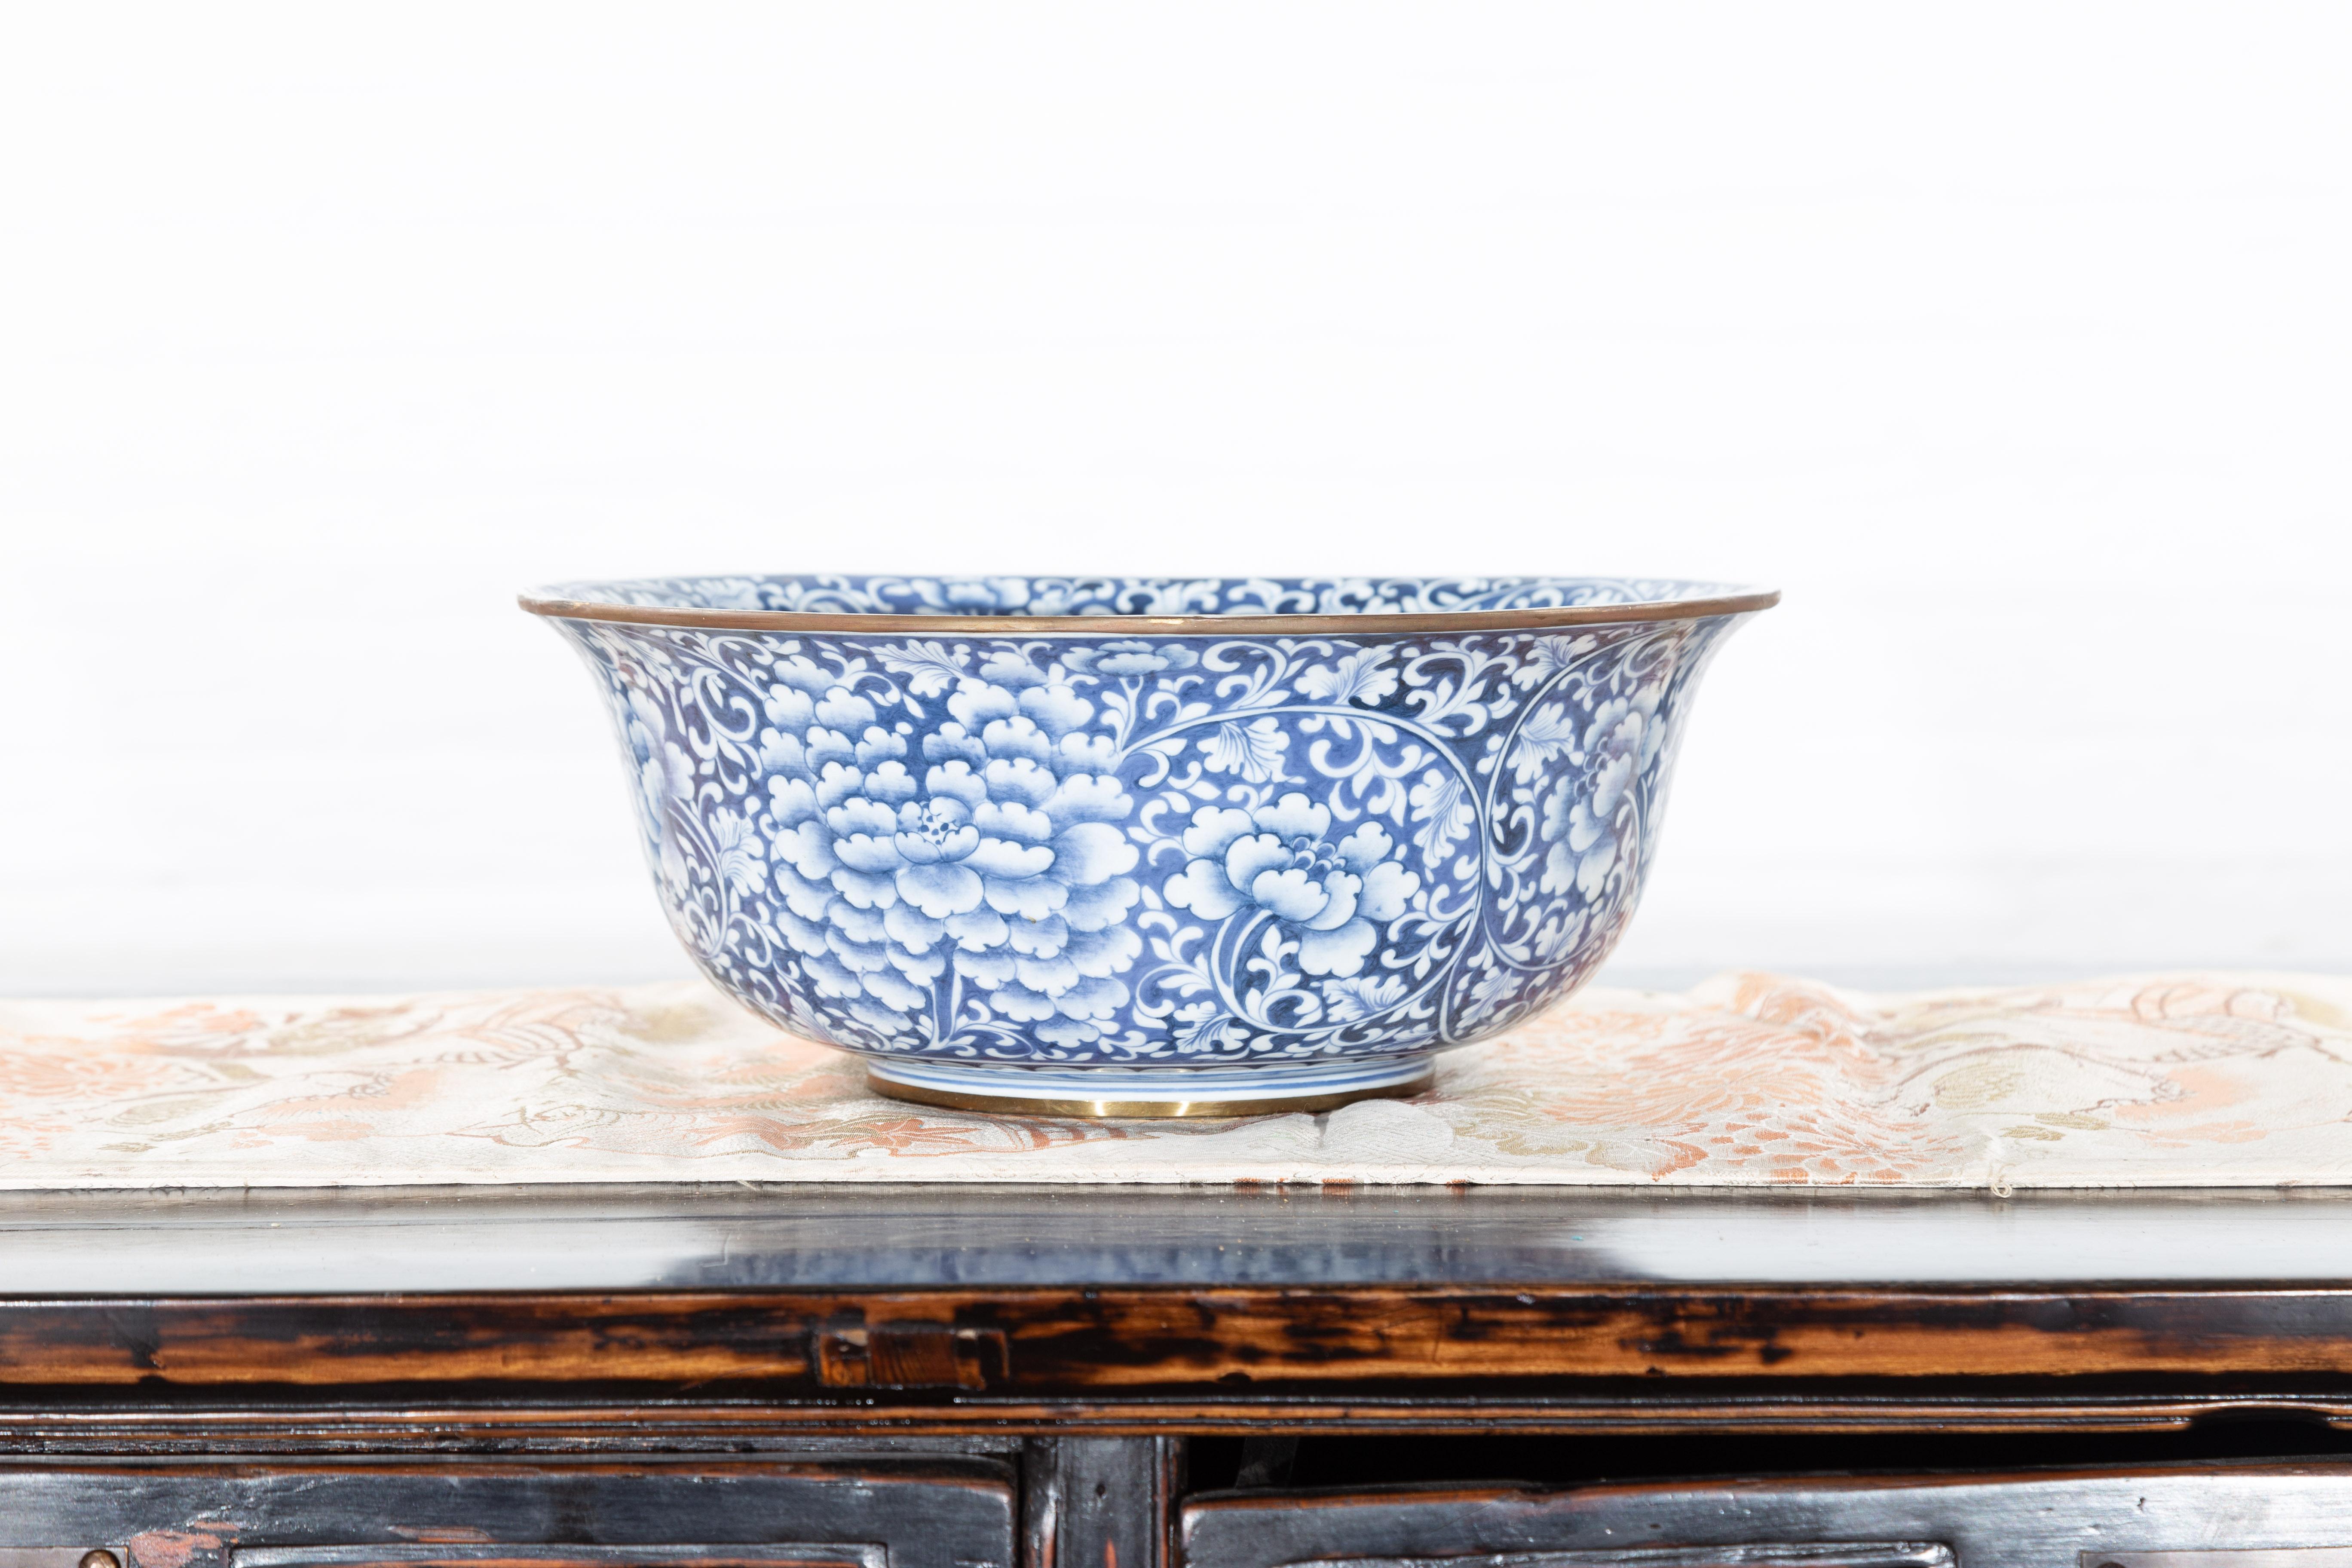 A contemporary Thai hand-painted blue and white porcelain bowl with floral motifs. Created in Thailand, this porcelain bowl features a circular tapering Silhouette with flaring lip, adorned with an abundant blue and white décor made of flowers and